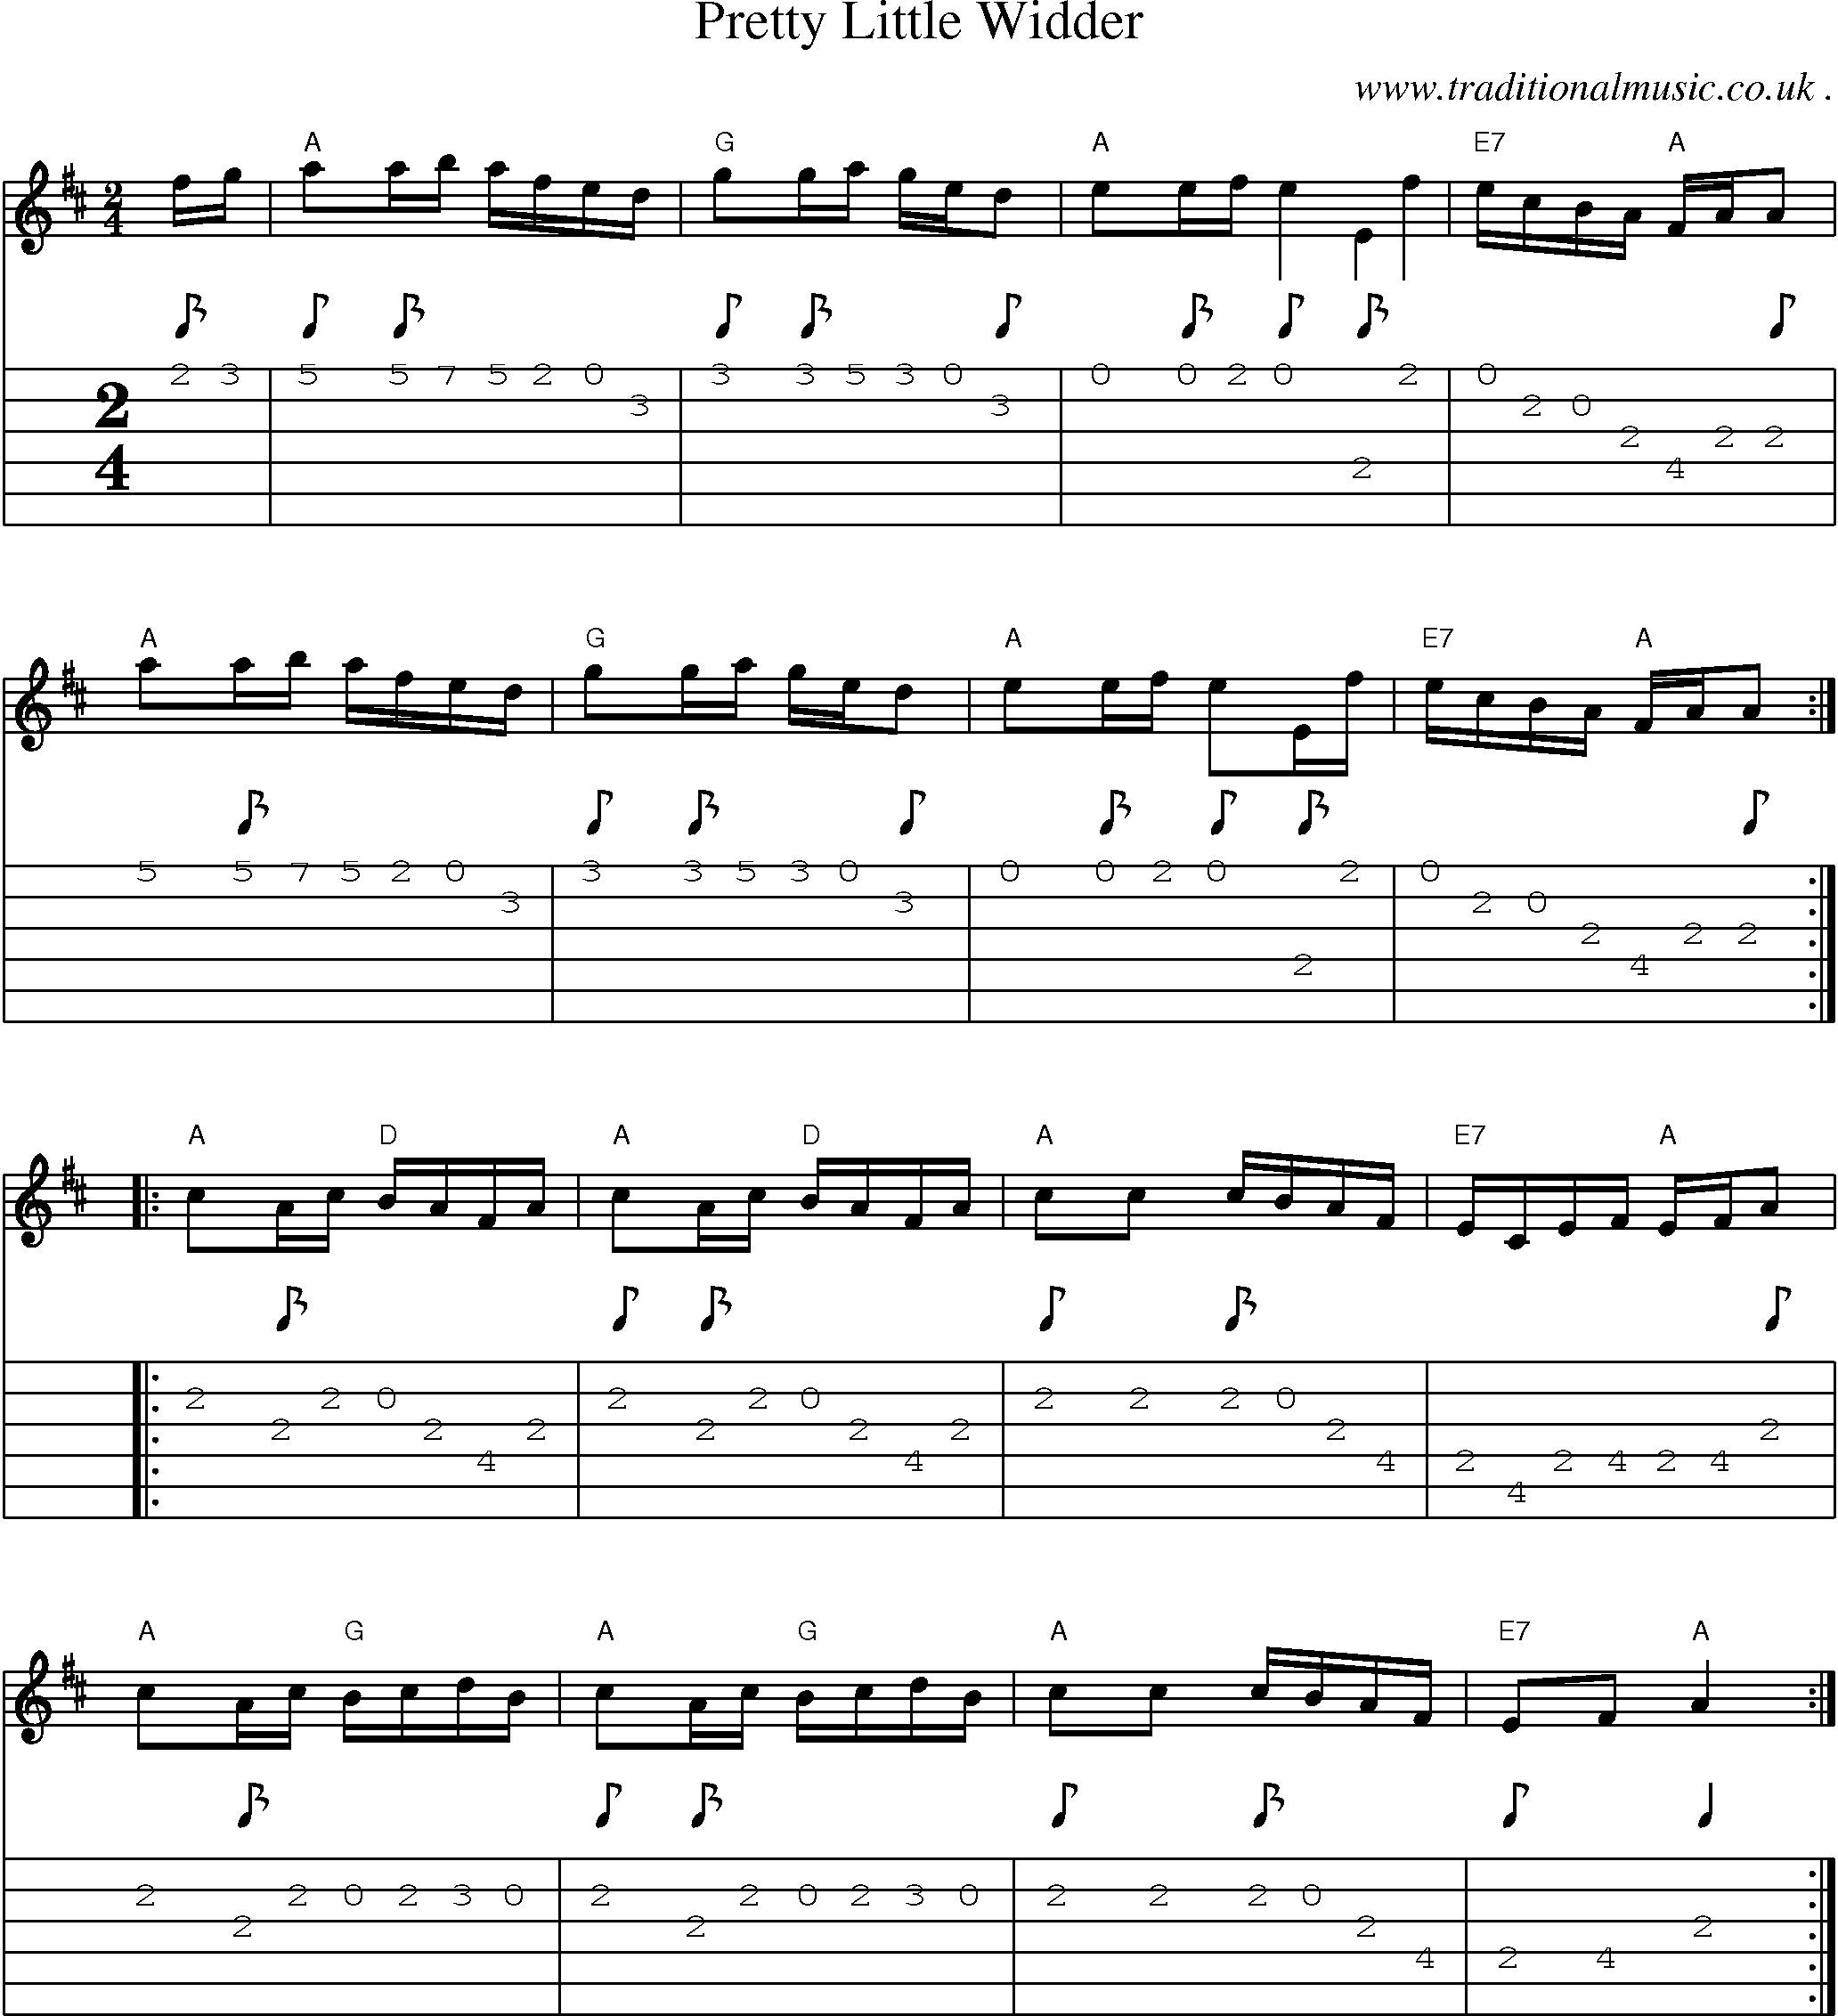 Music Score and Guitar Tabs for Pretty Little Widder